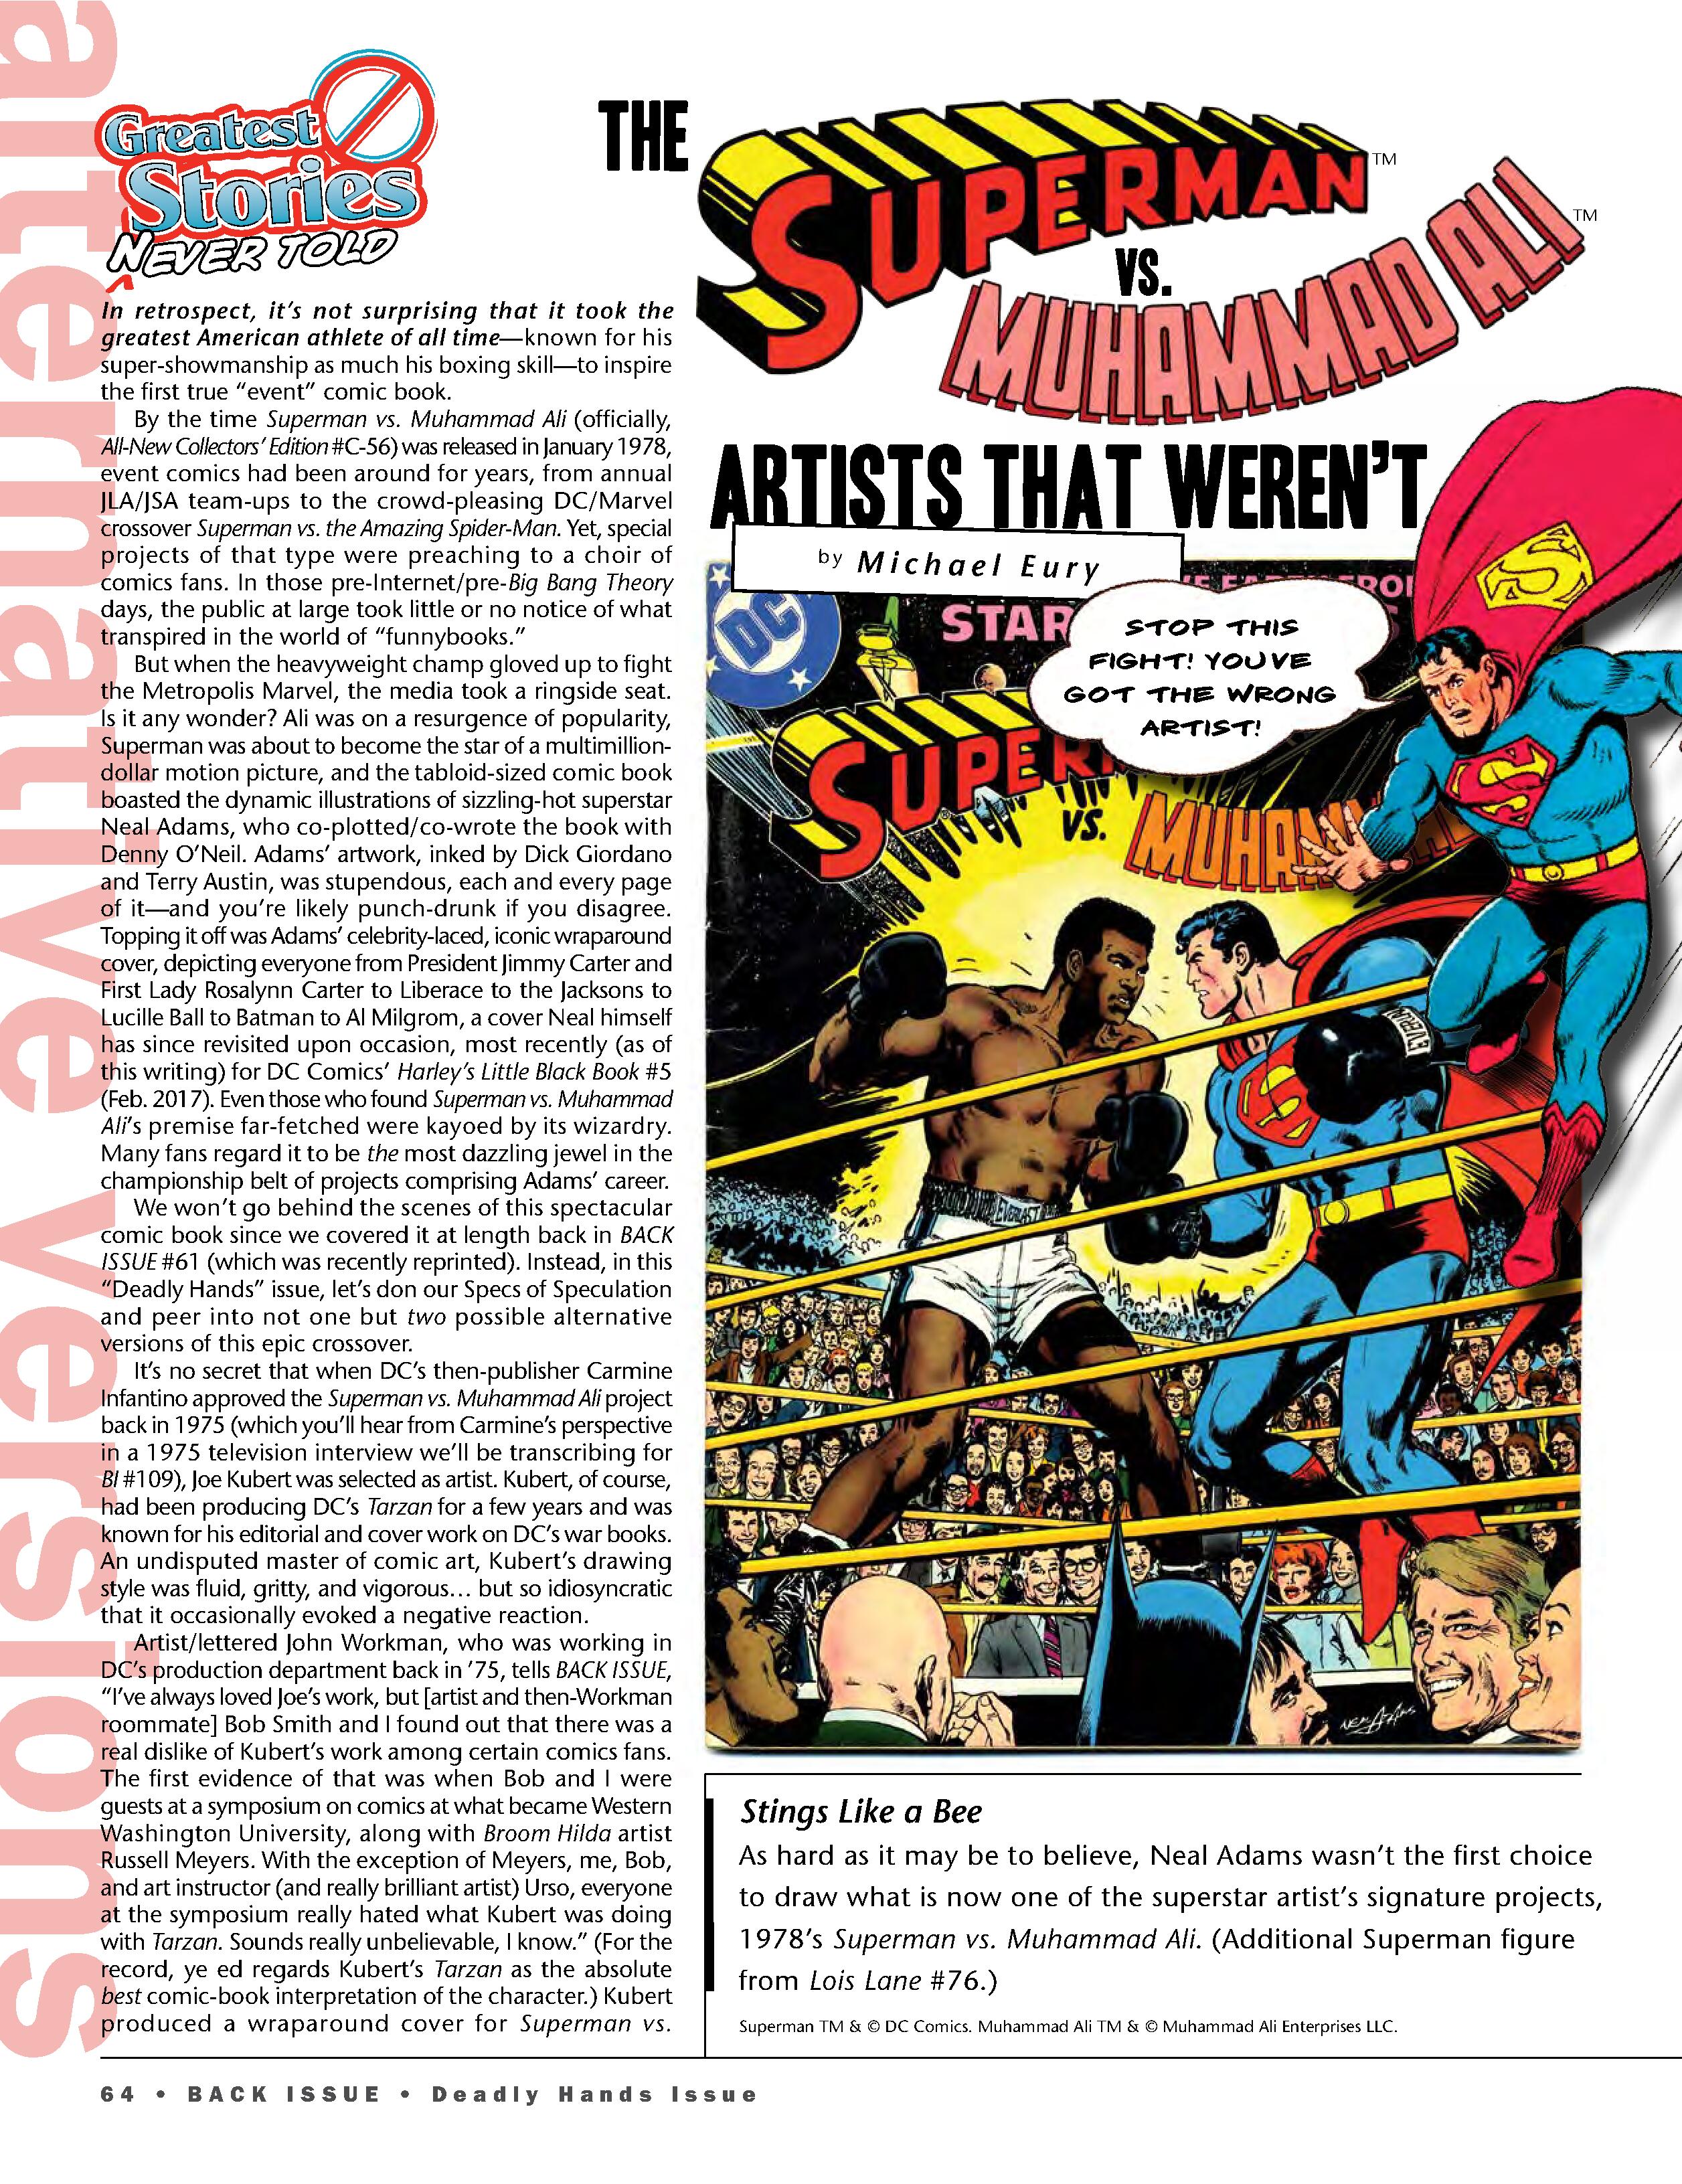 Read online Back Issue comic -  Issue #105 - 66